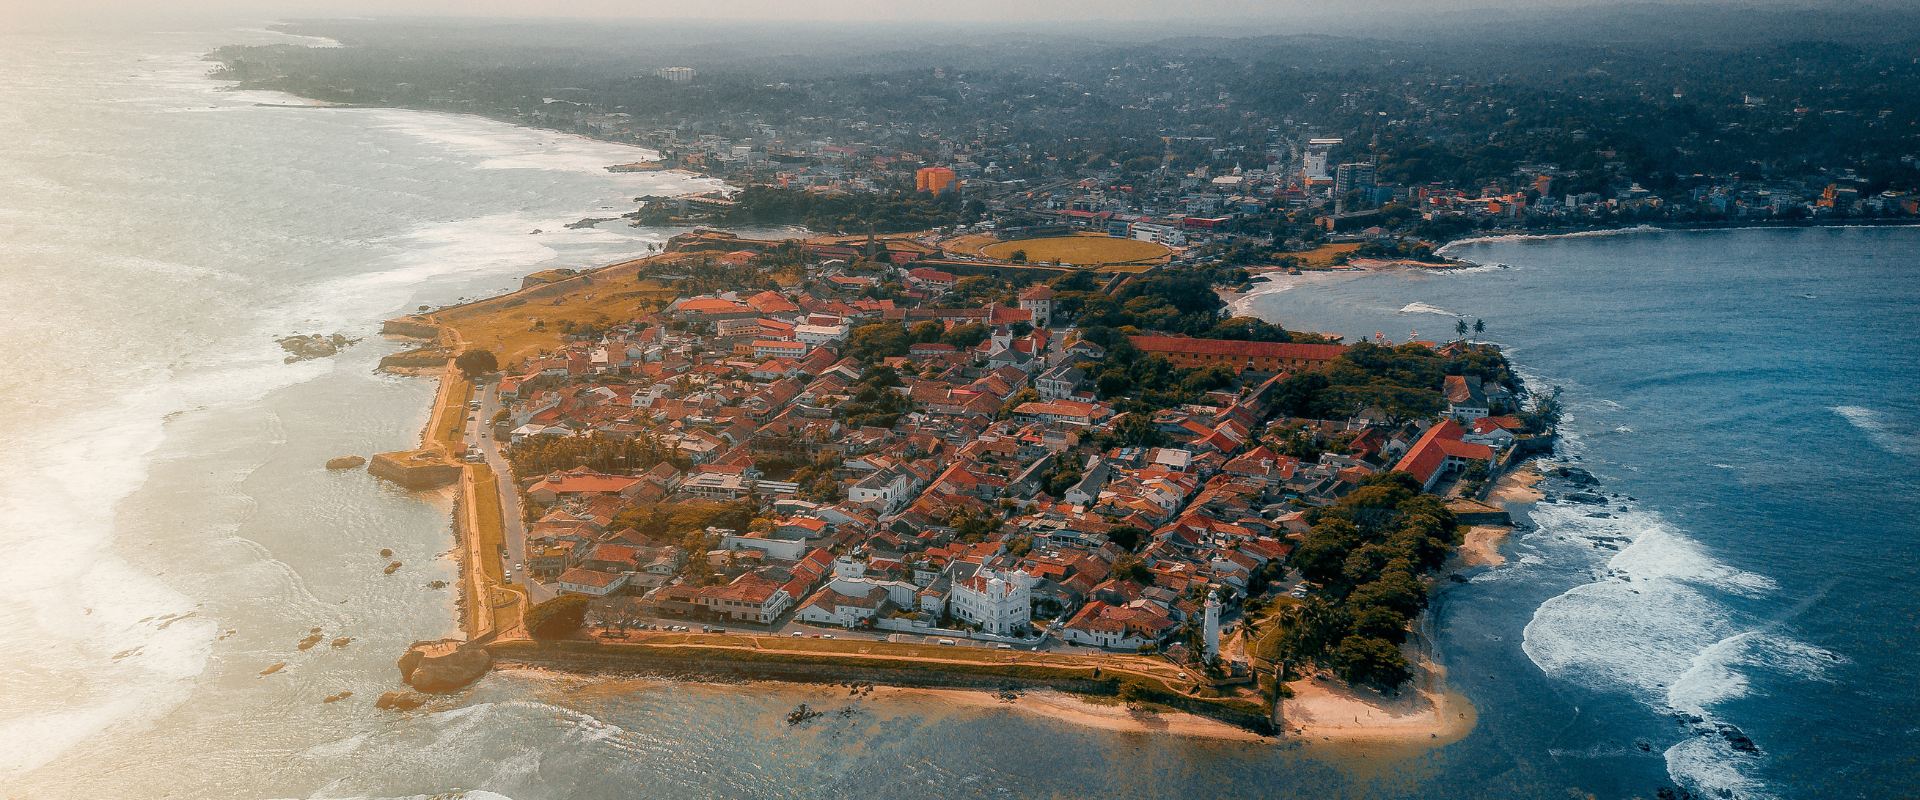 The best restaurants and bars in Galle